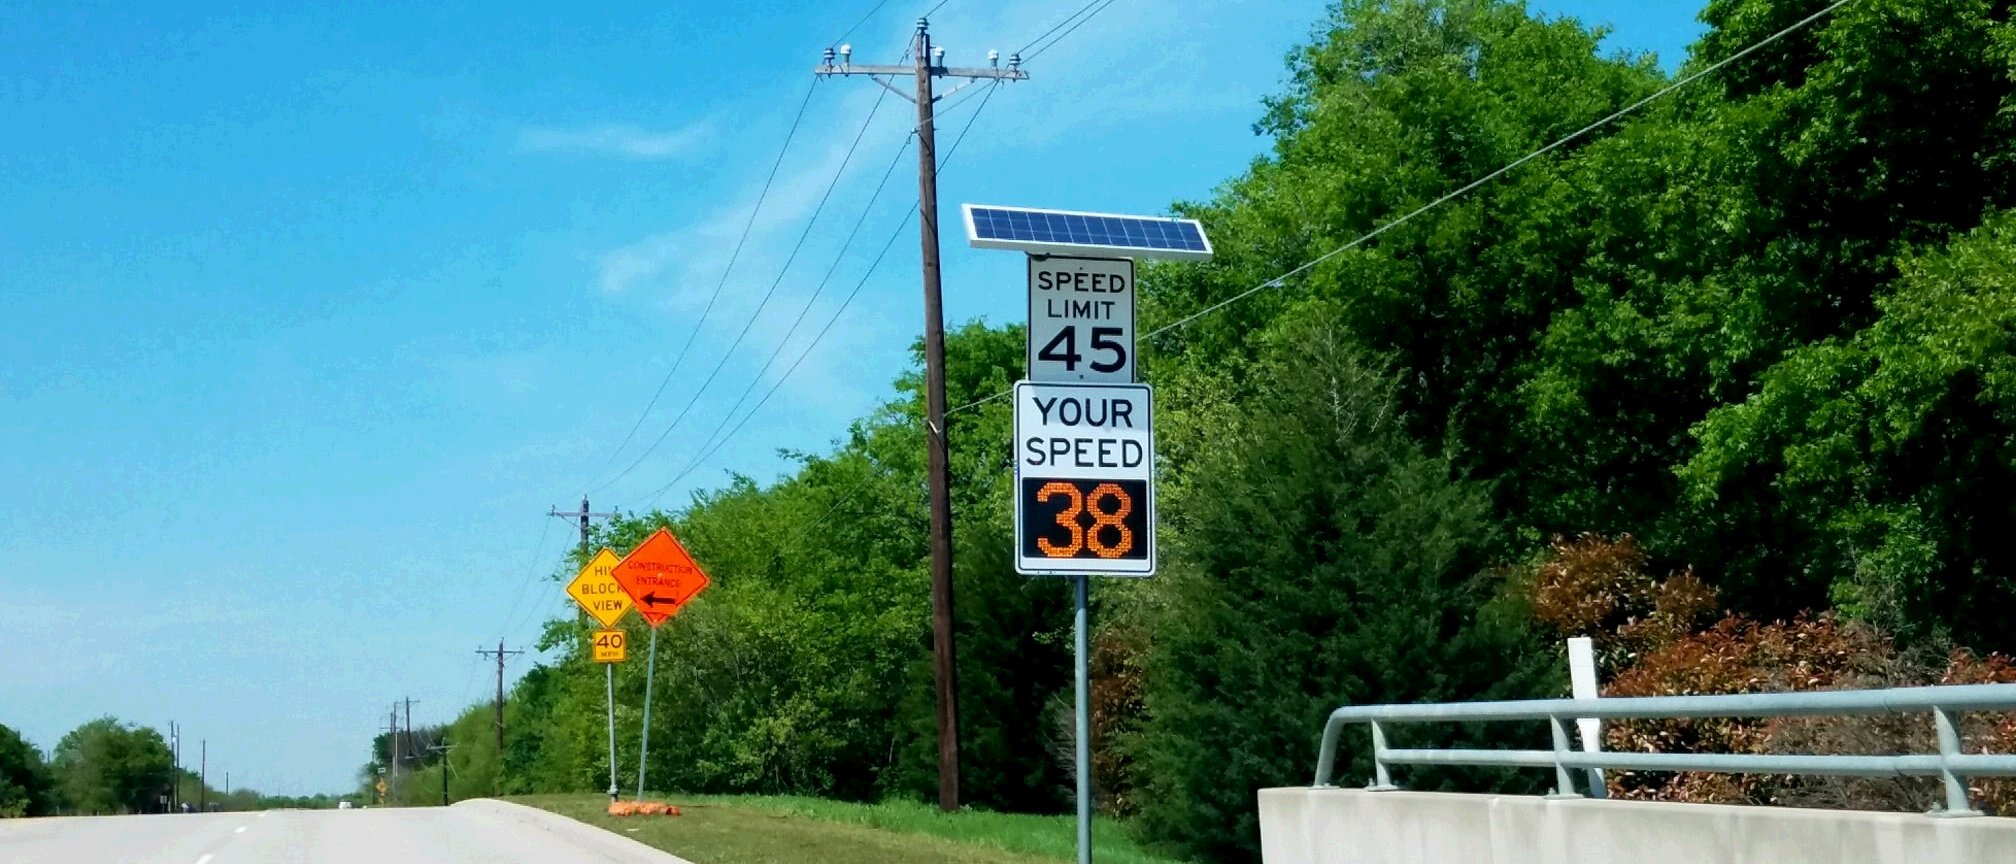 Speed limit sign with lighted speed detection display.